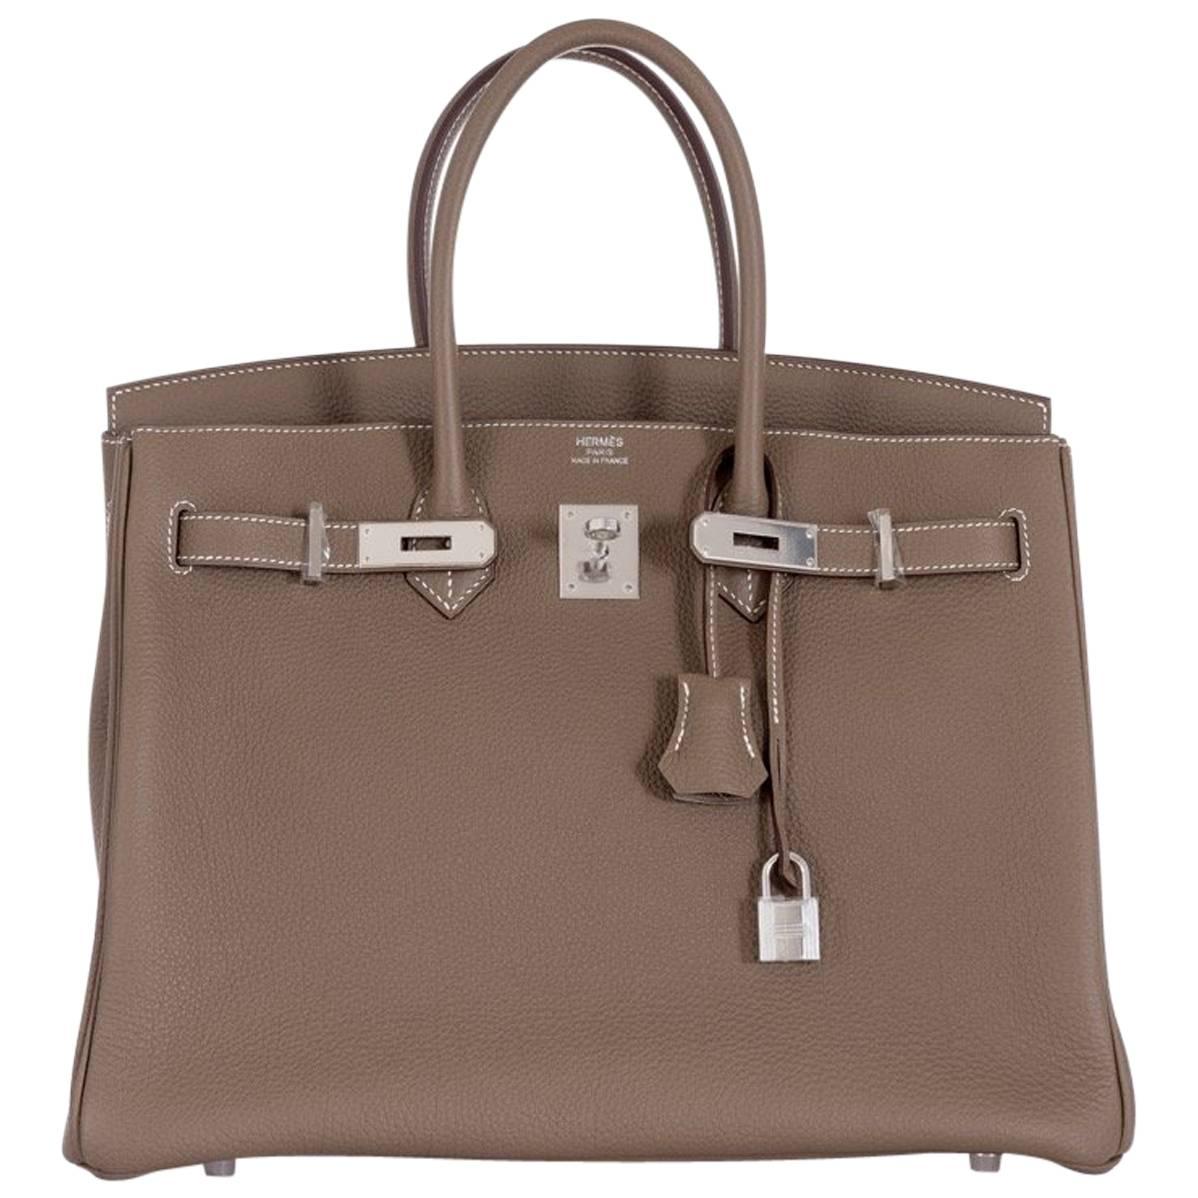 Hermes Birkin Bag 35 Etoupe Togo Leather with an extra phone pocket For Sale